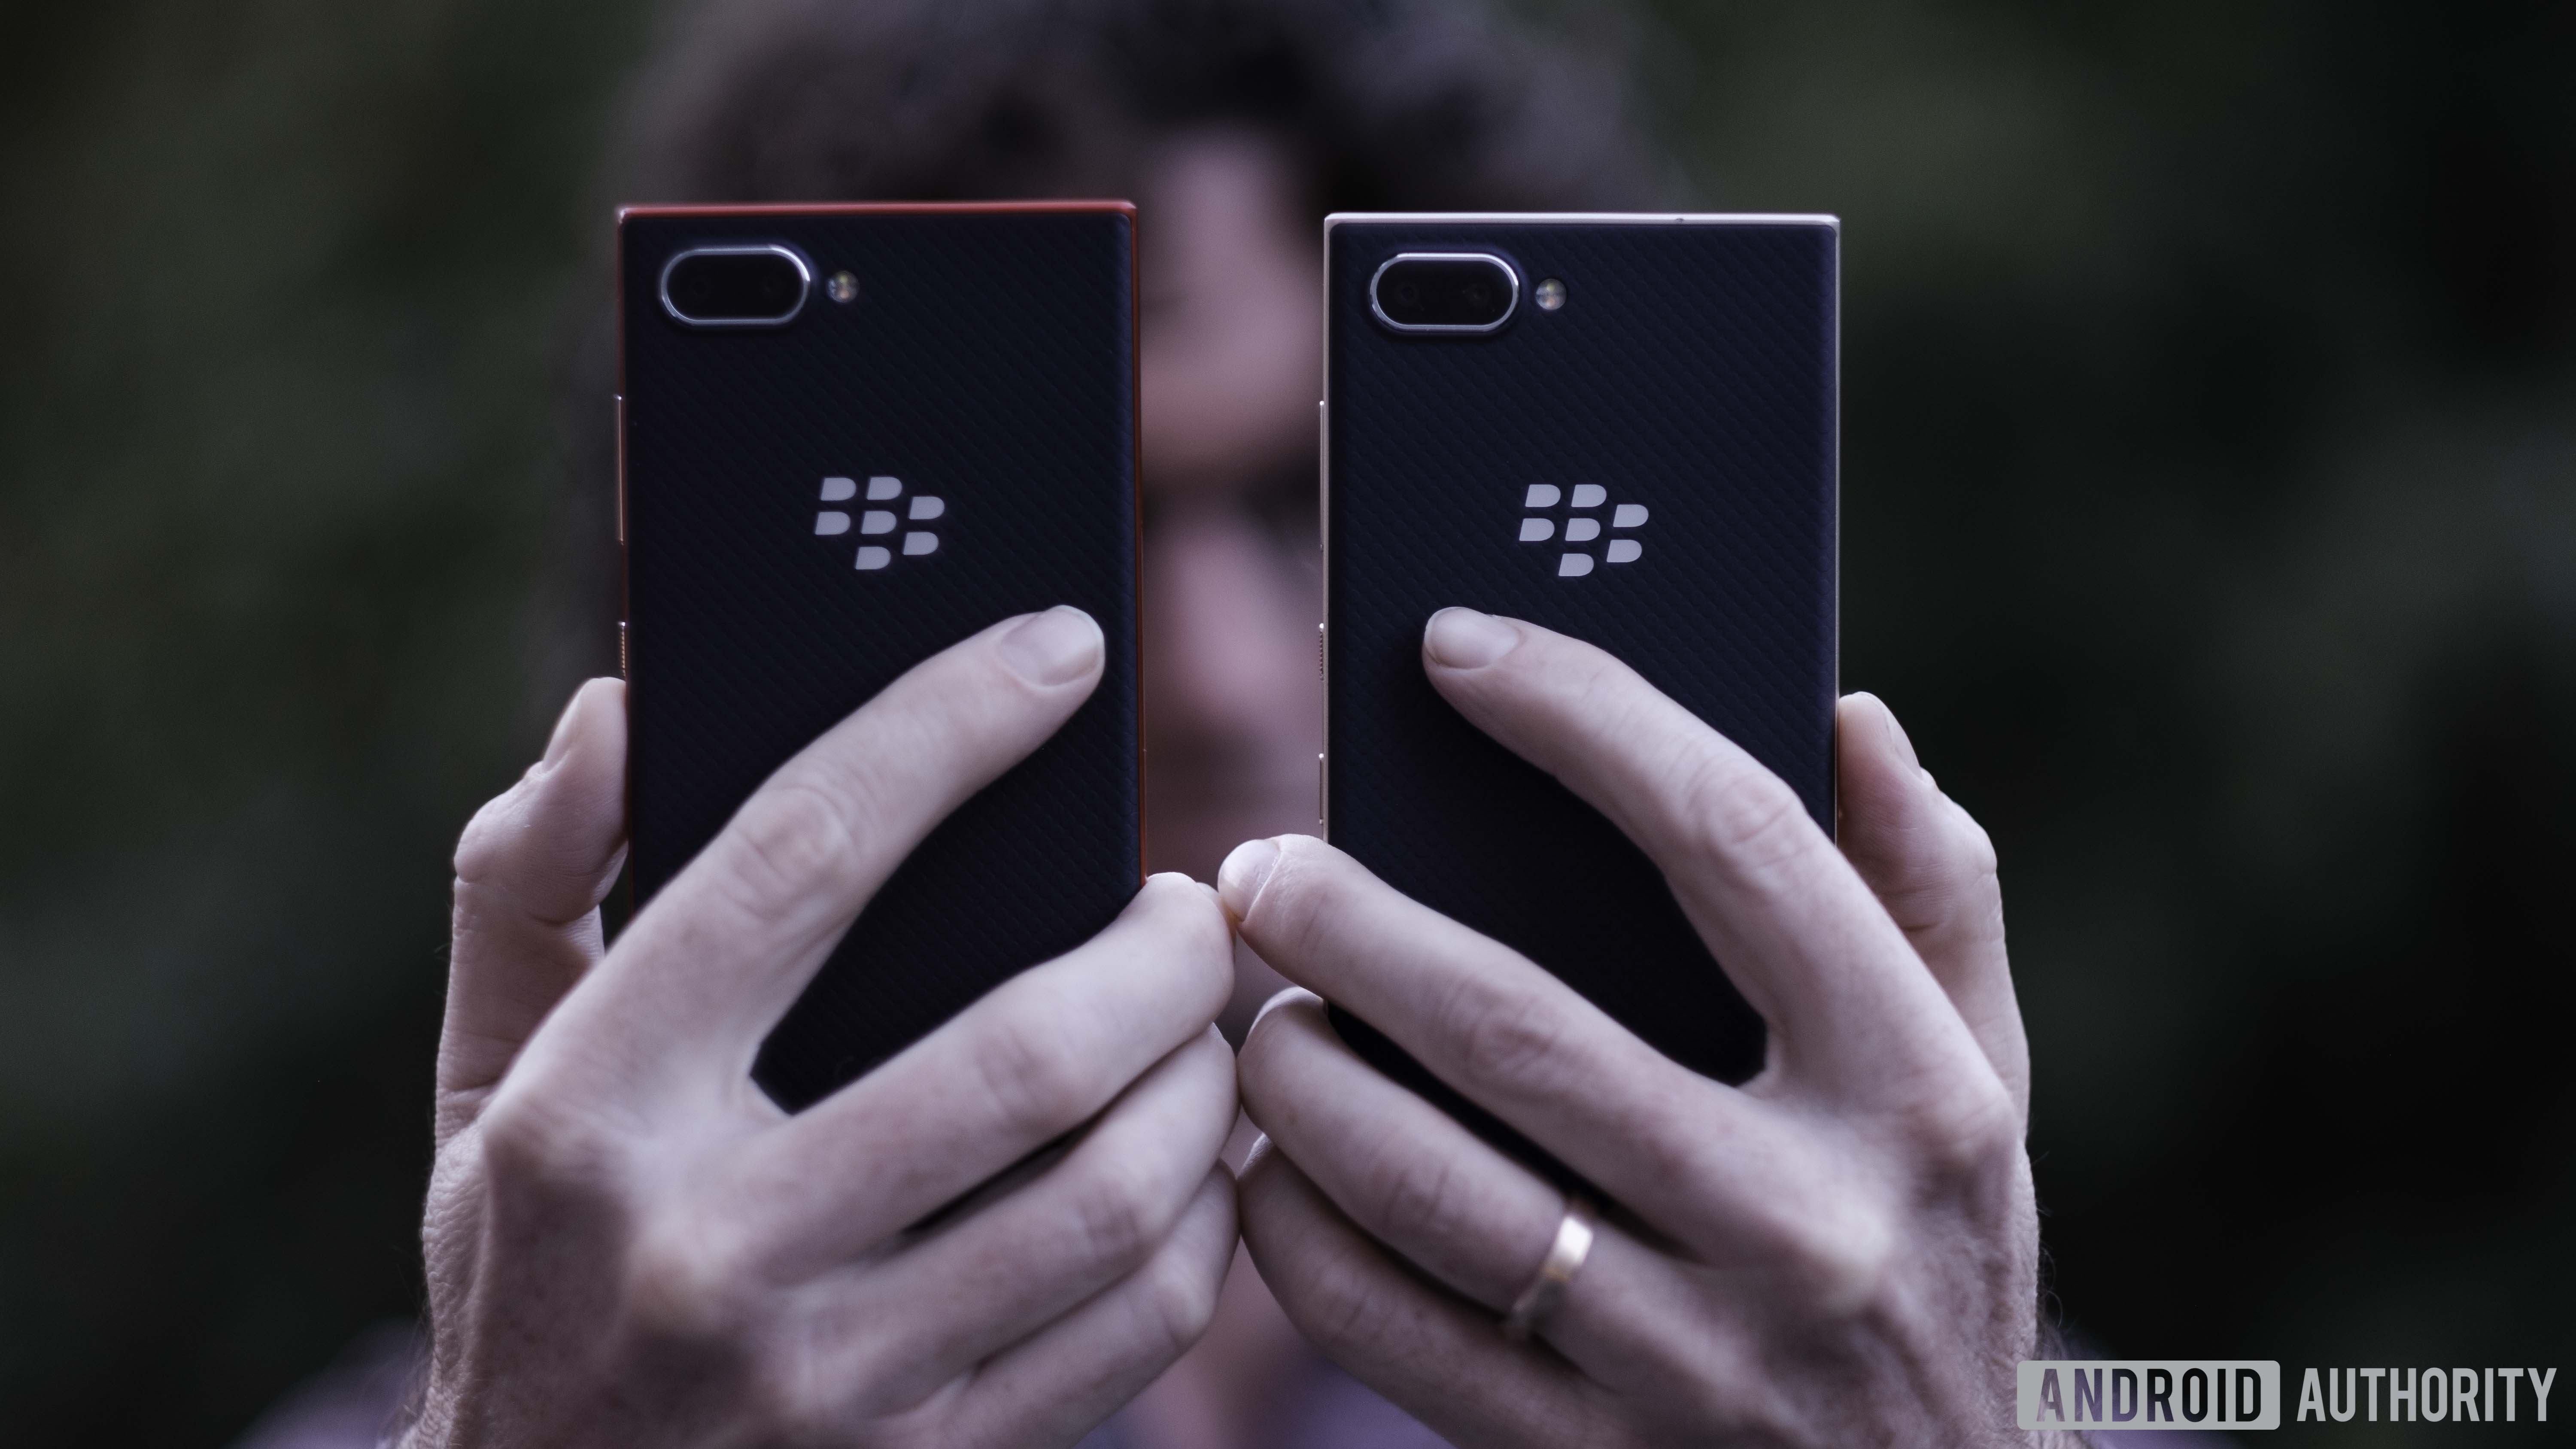 Holding two Blackberry Key2 LE devices showing backs, cameras, and BlackBerry logo